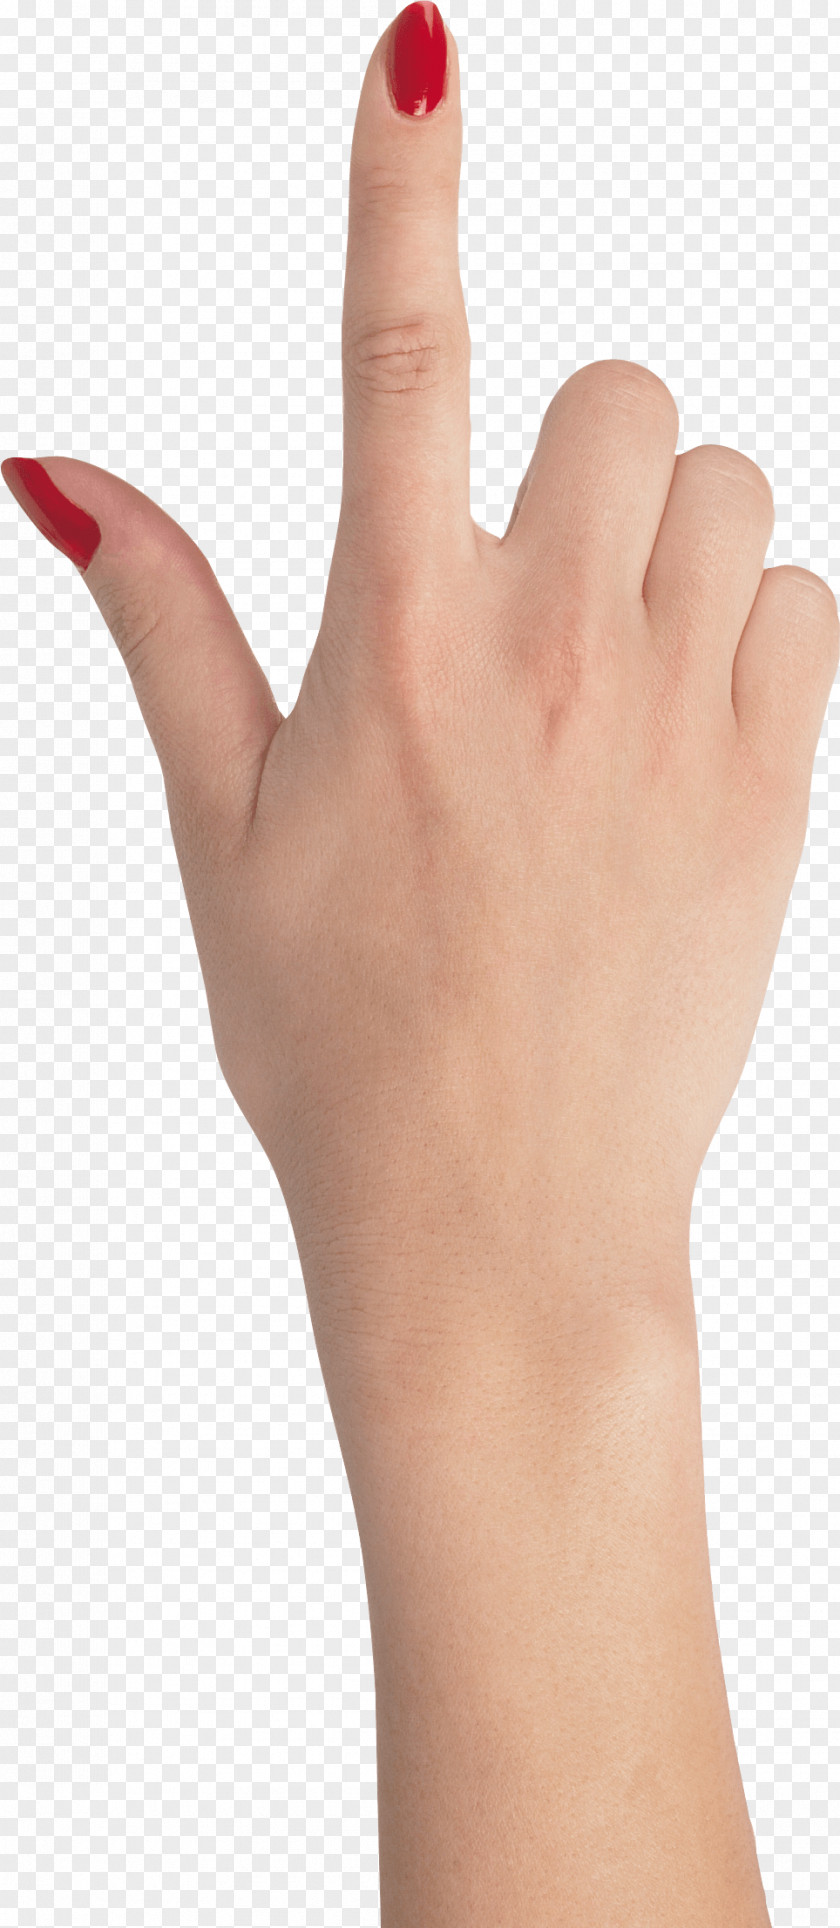 One Finger Hand With Red Nails Hands Image Clip Art PNG